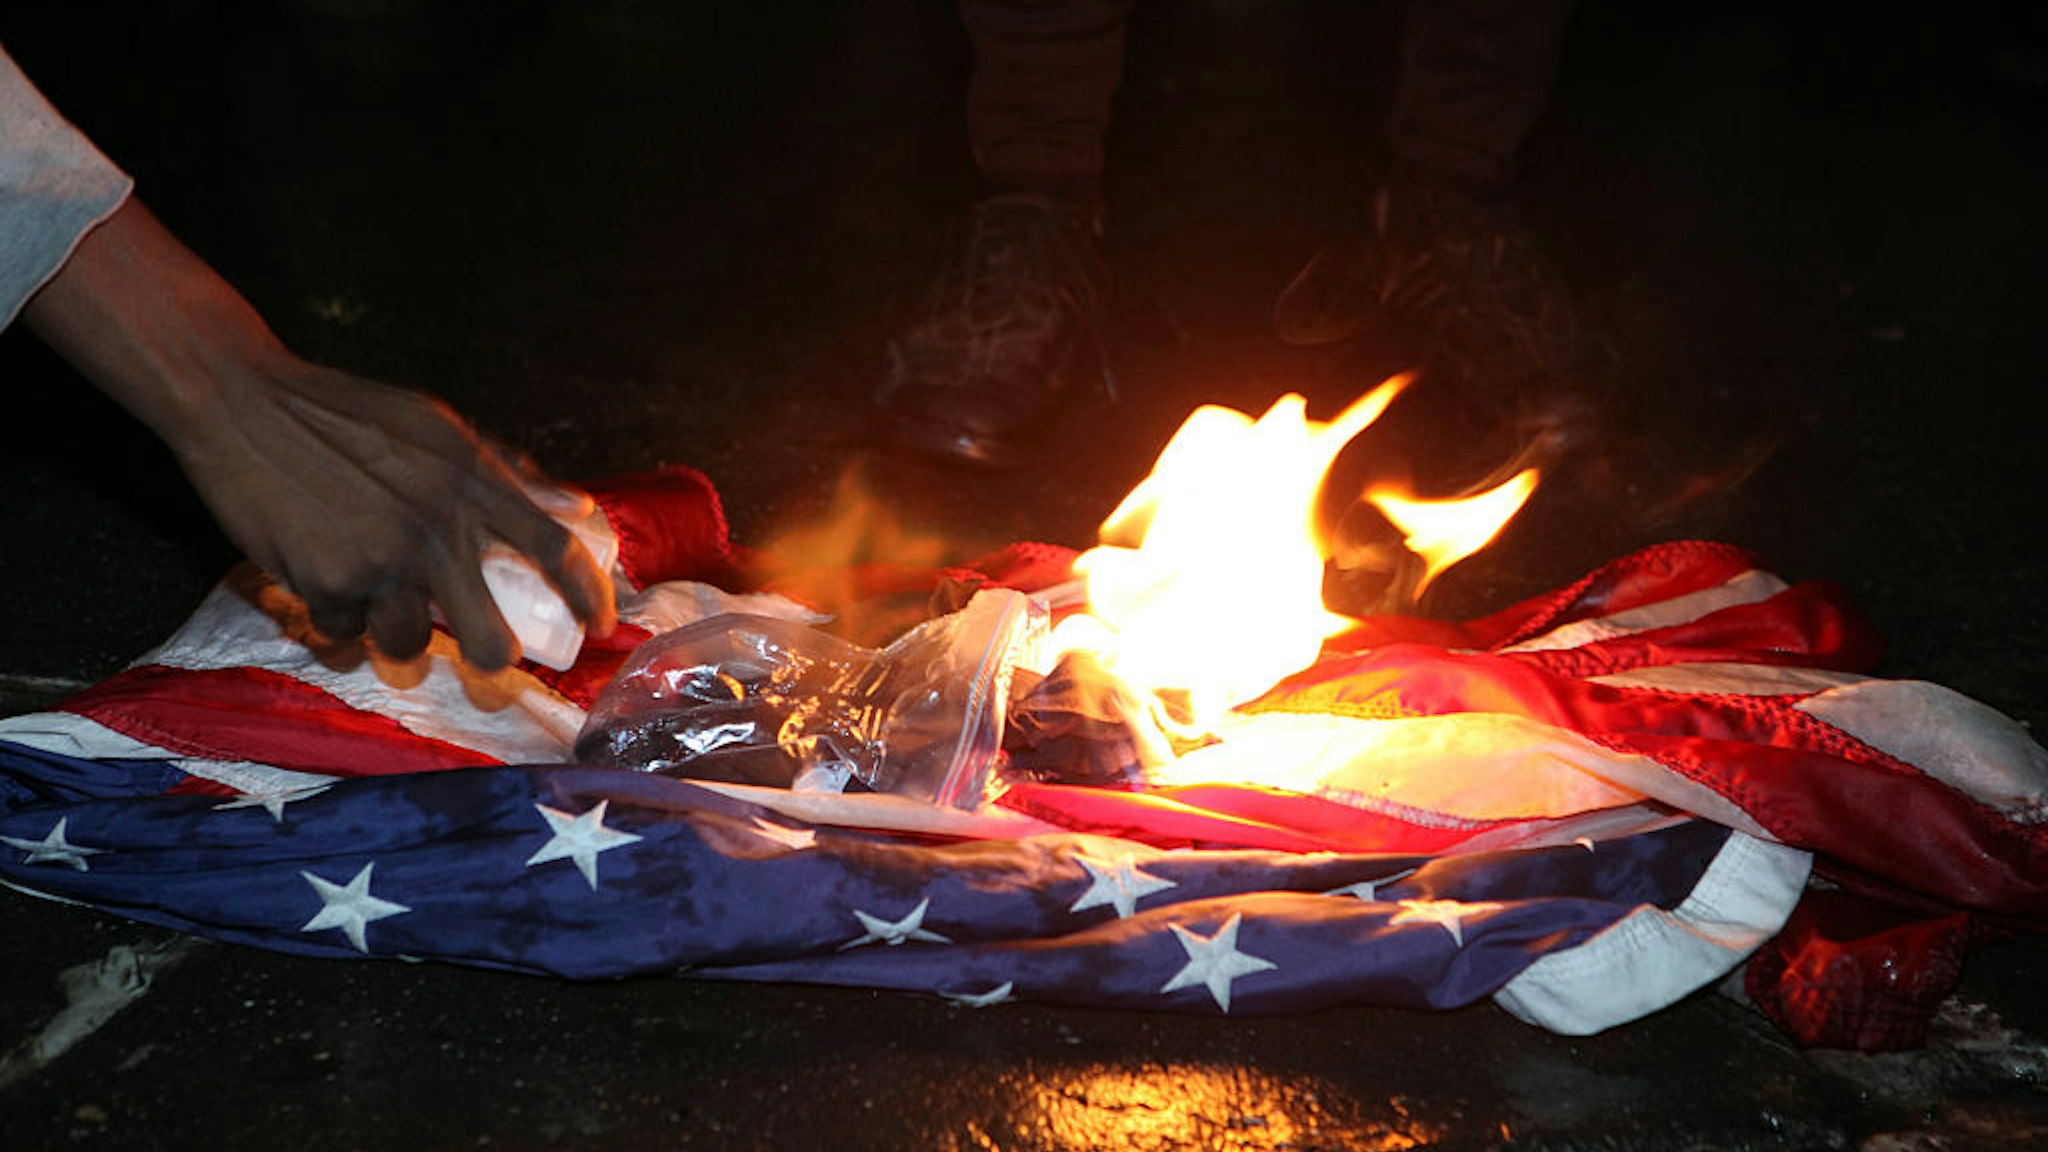 NEW YORK - NOVEMBER 9: Protesters burn the Stars and Stripes American Flag outside Trump Tower as Donald Trump is elected President on November 9, 2016 in New York City. (Ruaridh Connellan/BarcroftImages / Barcroft Media via Getty Images)